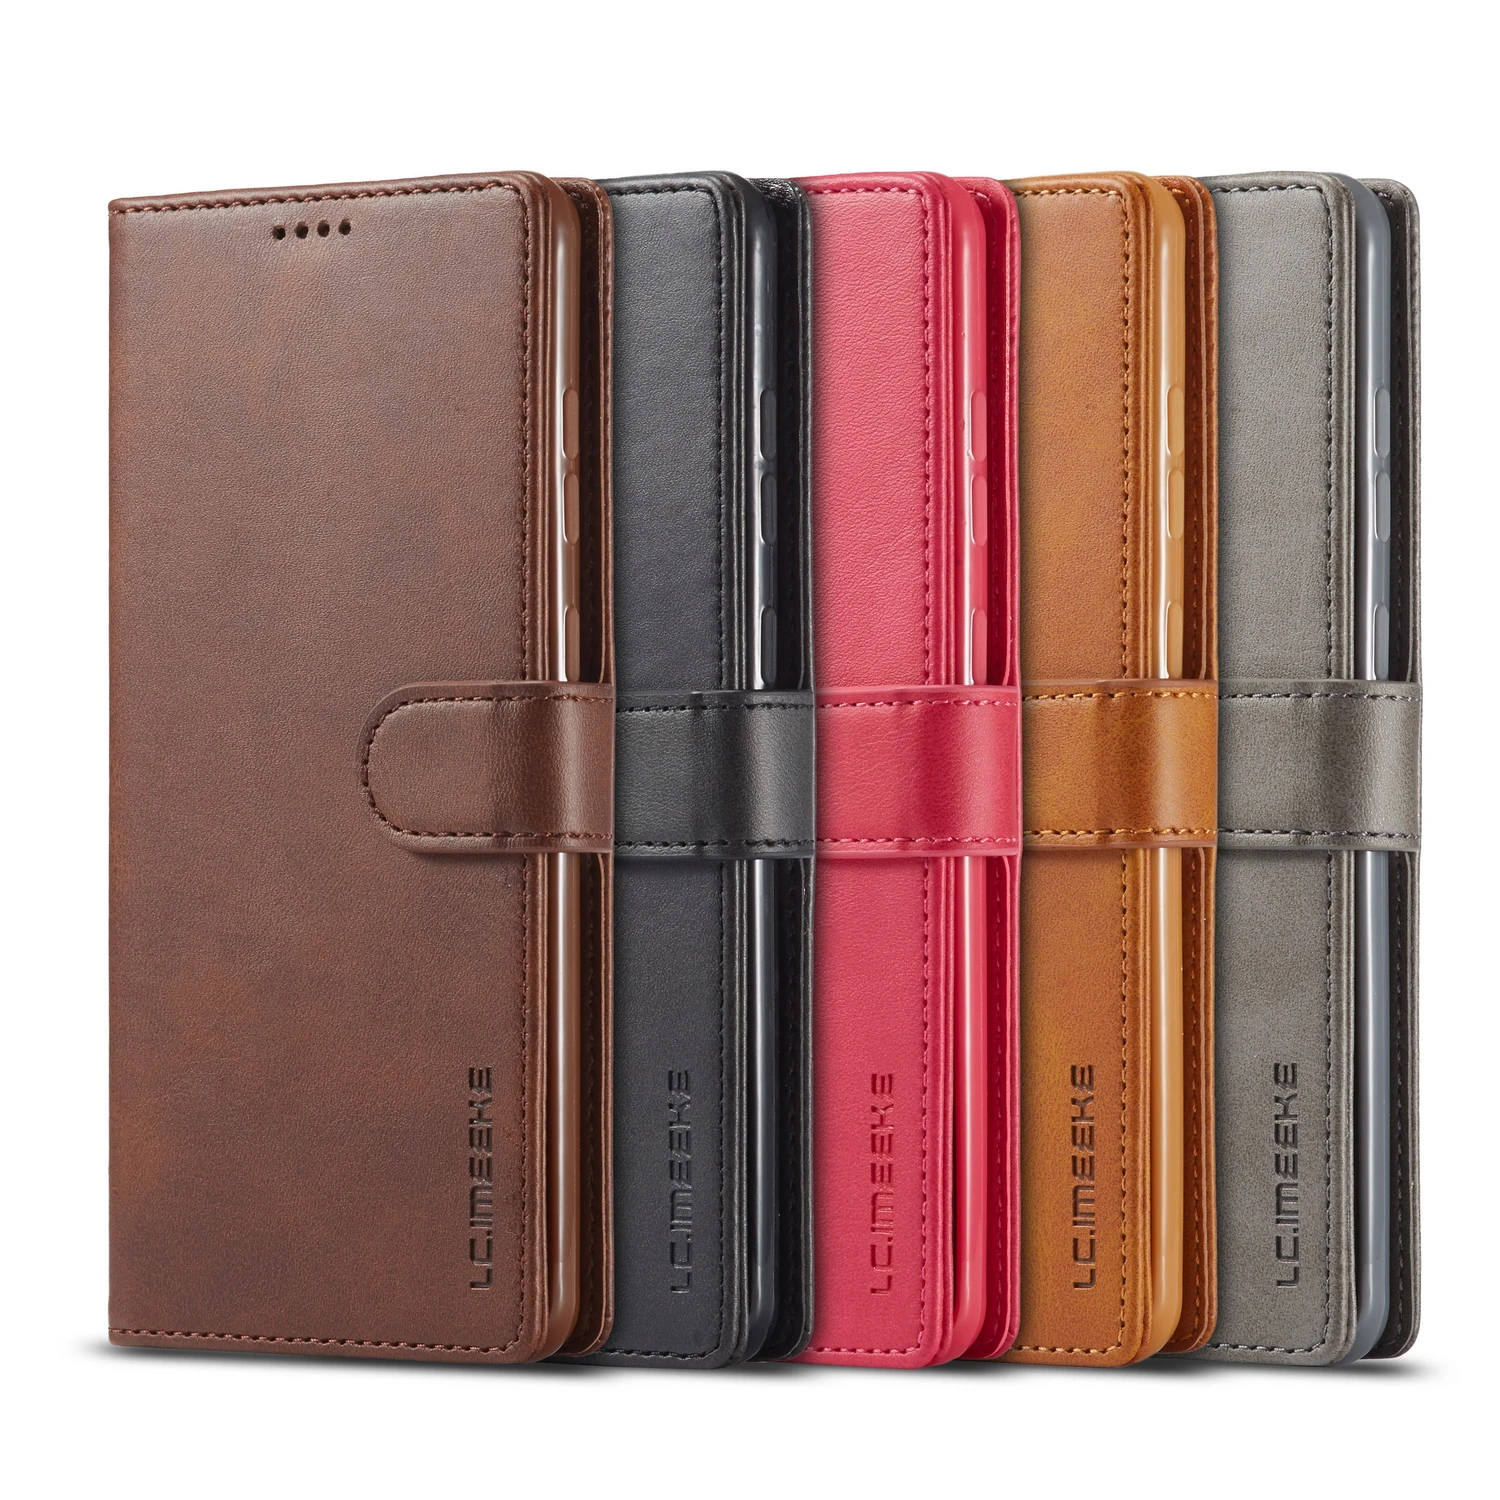 Luxury For Samsung S21 FE A22 F62 M62 A52 A72 A02 M02 A32 5G Plus Ultra TPU Soft Flip Wallet Card Package PU Leather Case Cover